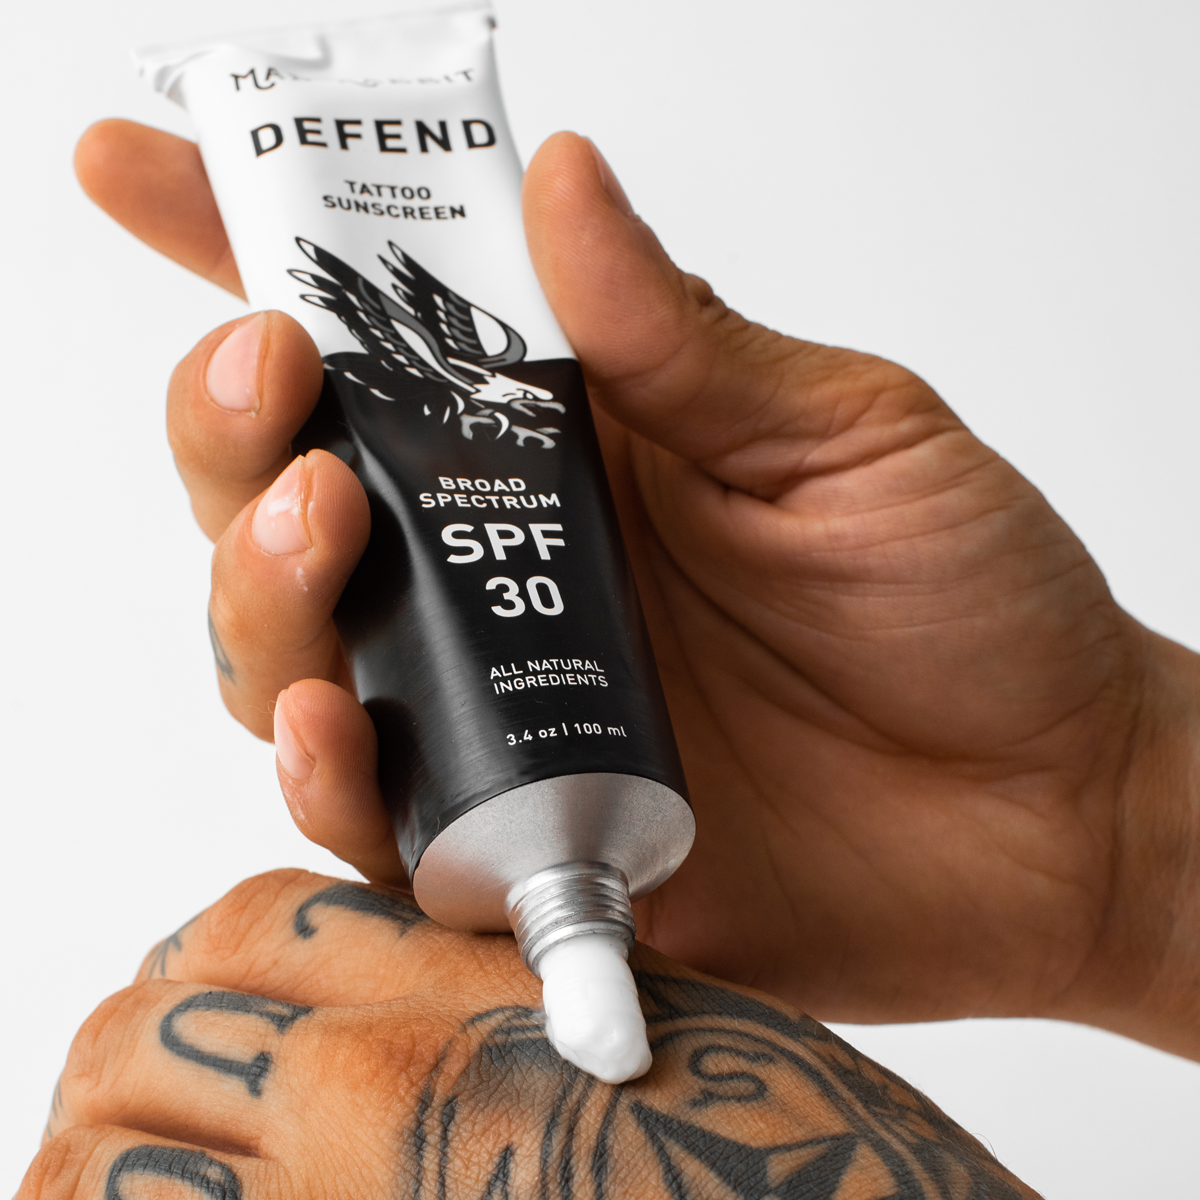 Tattoo Care Bestsellers | Tattoo Daily Lotion, SPF 30, Tattoo Balm | Mad  Rabbit – Mad Rabbit Tattoo